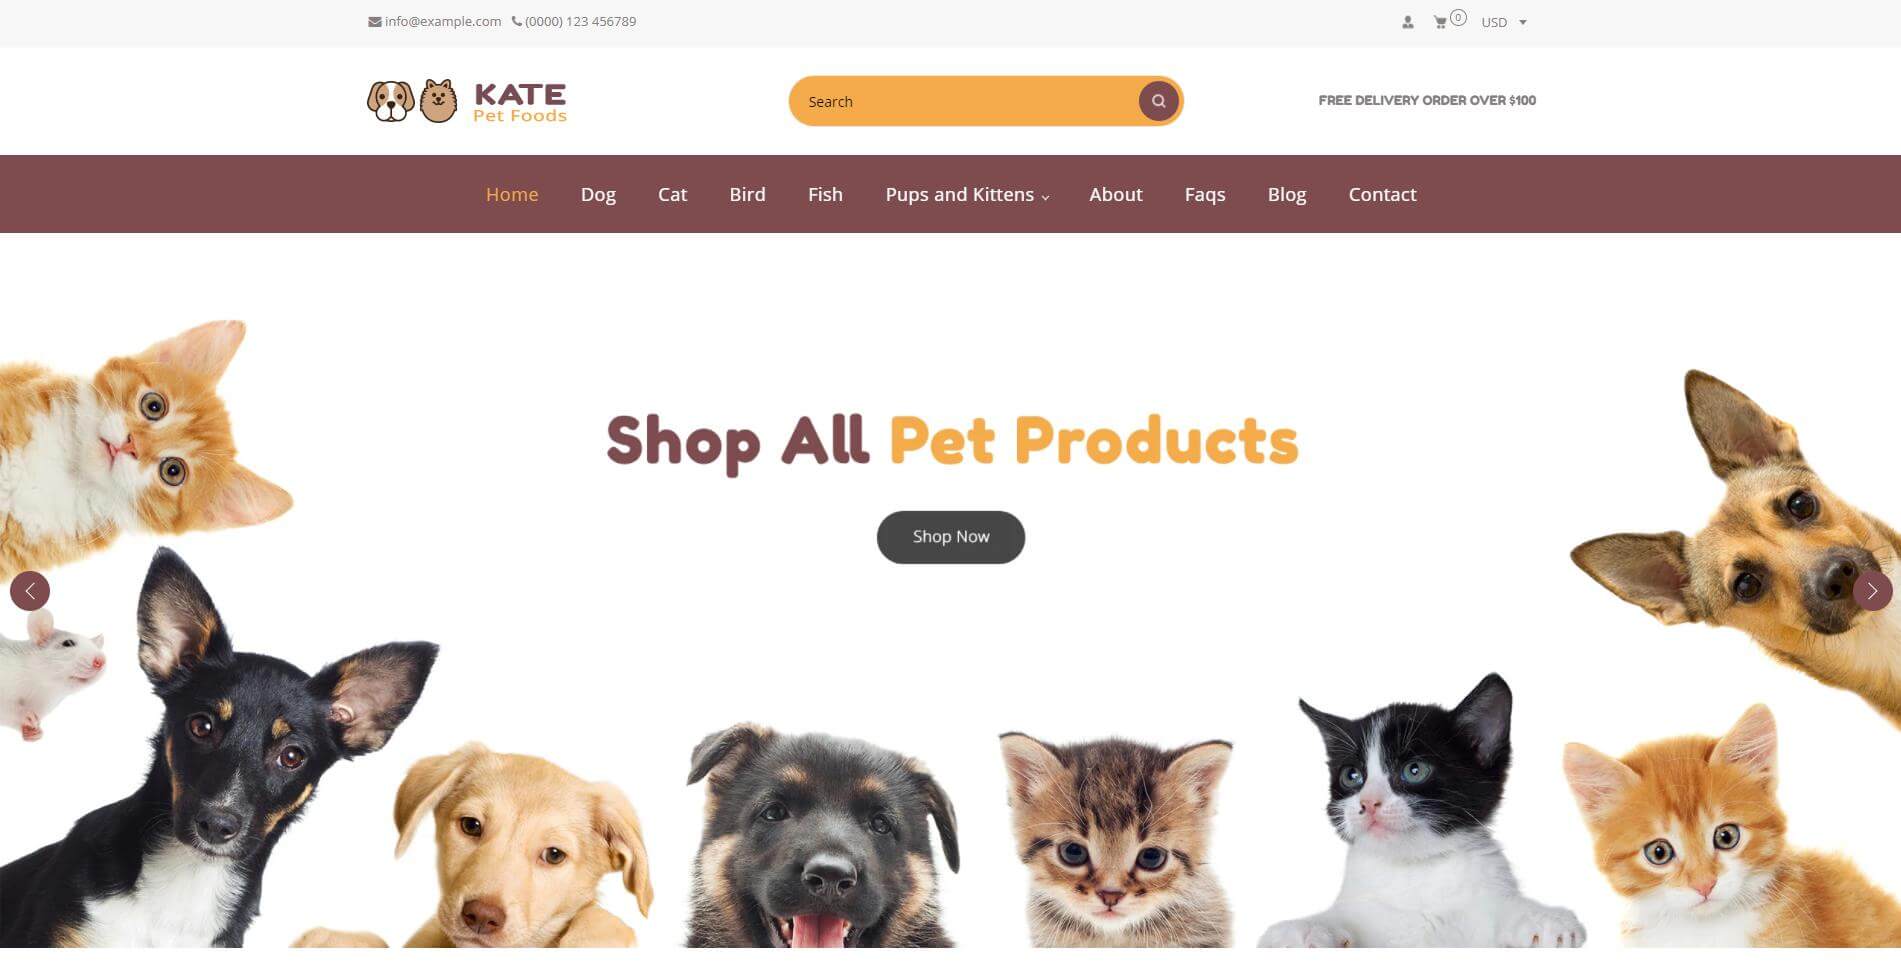 Want to bring exploding visual elements to liven up your store? Kate should be your top pick!